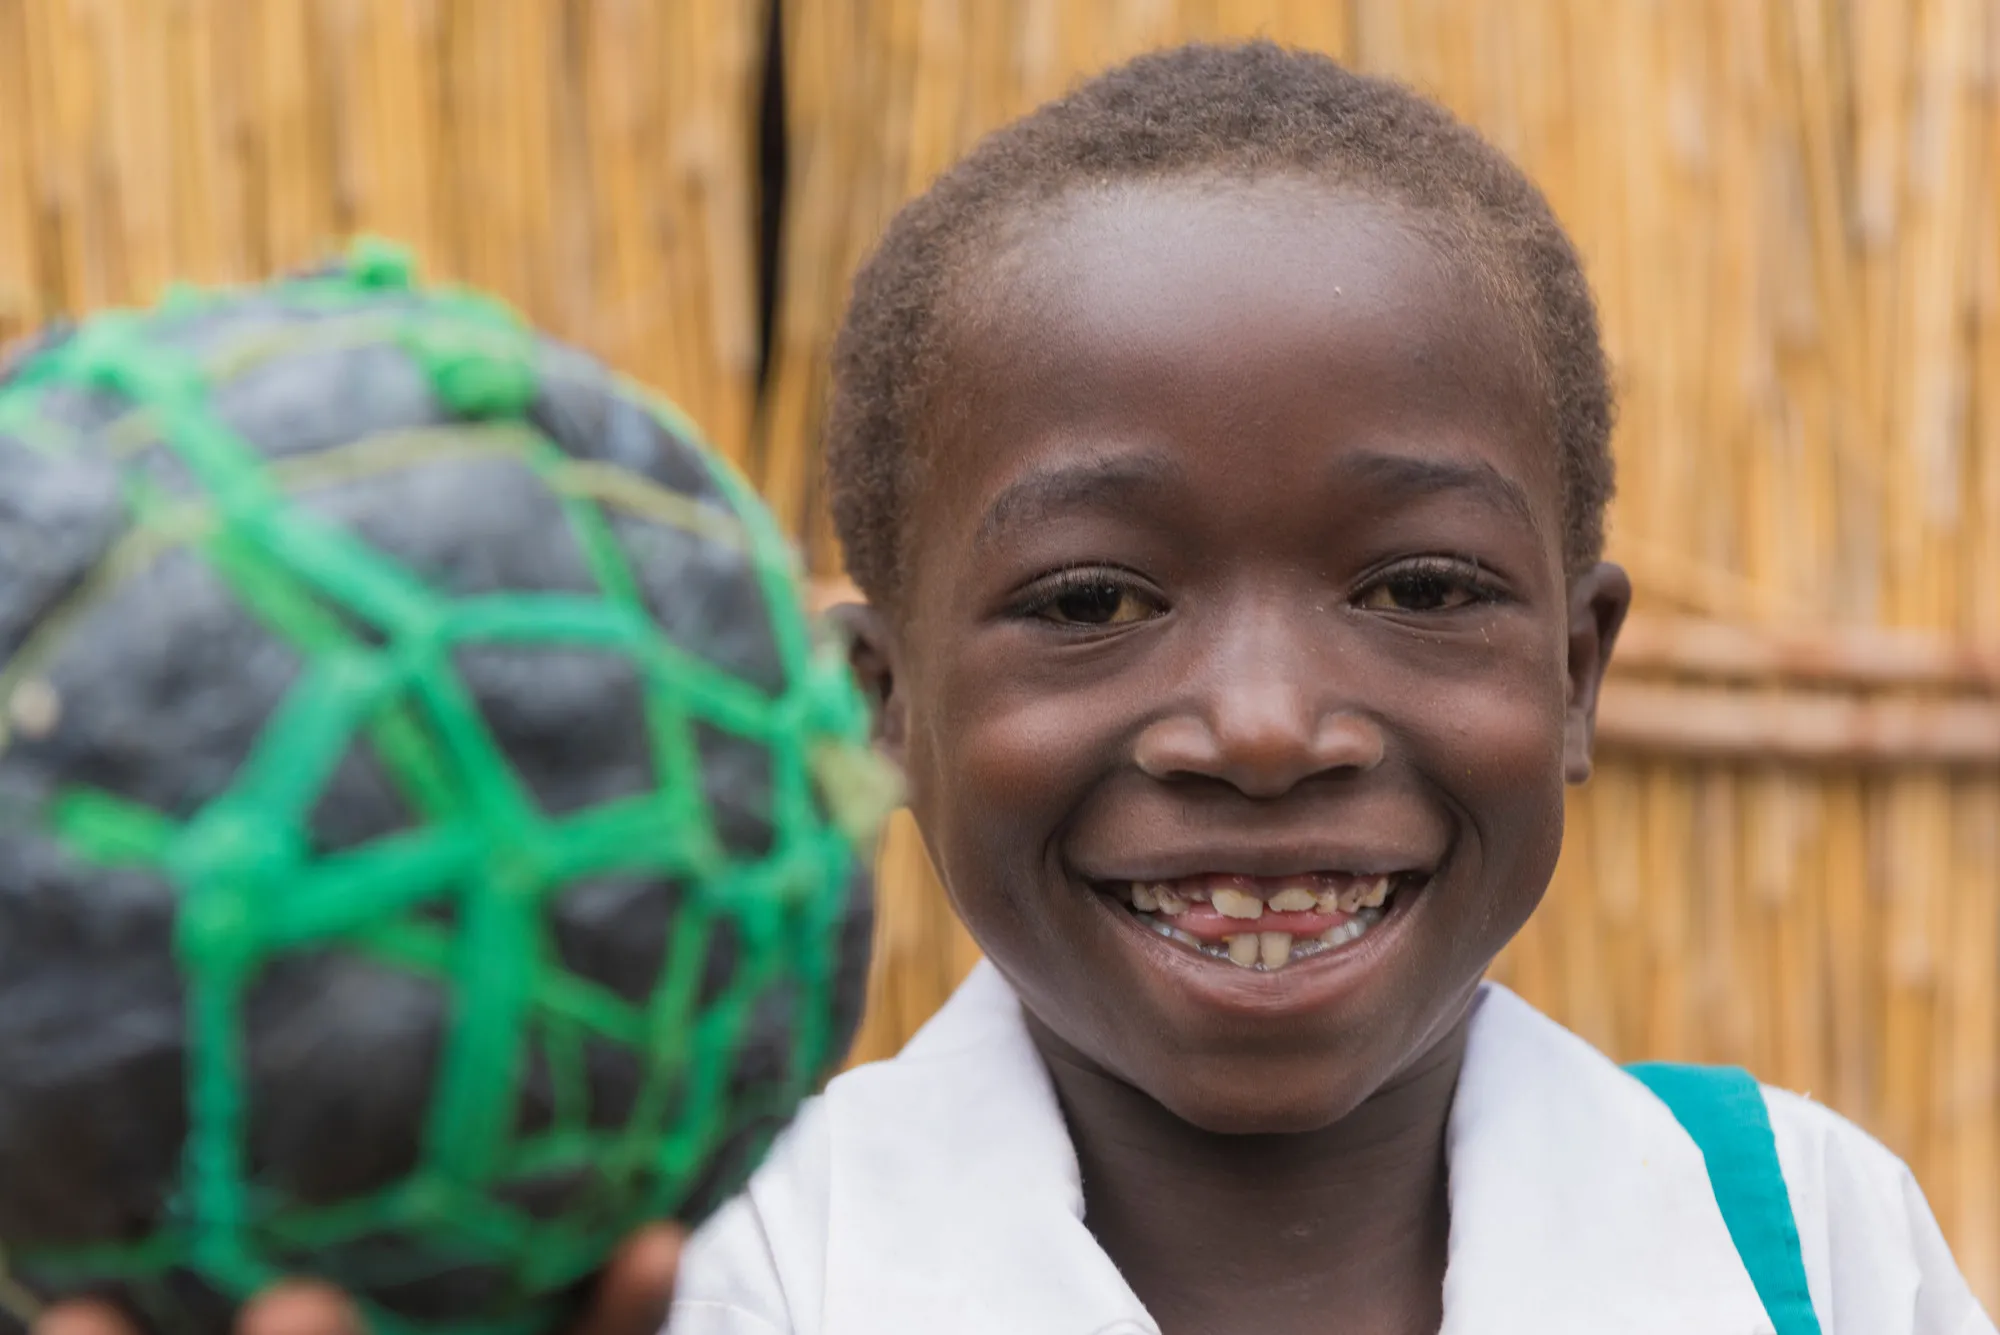 A young girl smiles wile holding an improvised soccer ball made of string and plastic bags.